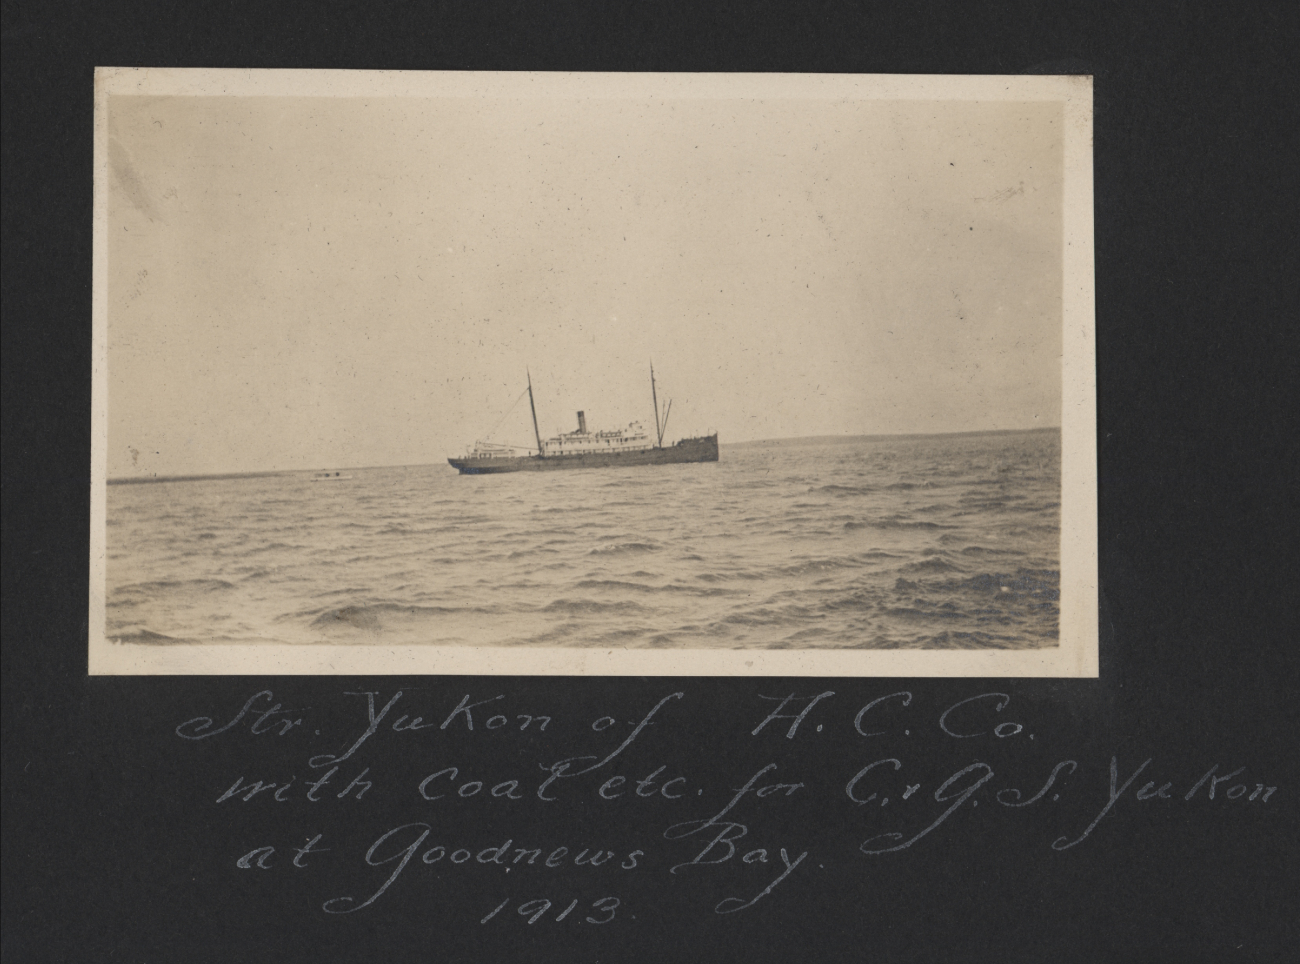 Steamer YUKON of the Alaska Commercial Company with coal for the C&GS; shipYUKON at Goodnews Bay